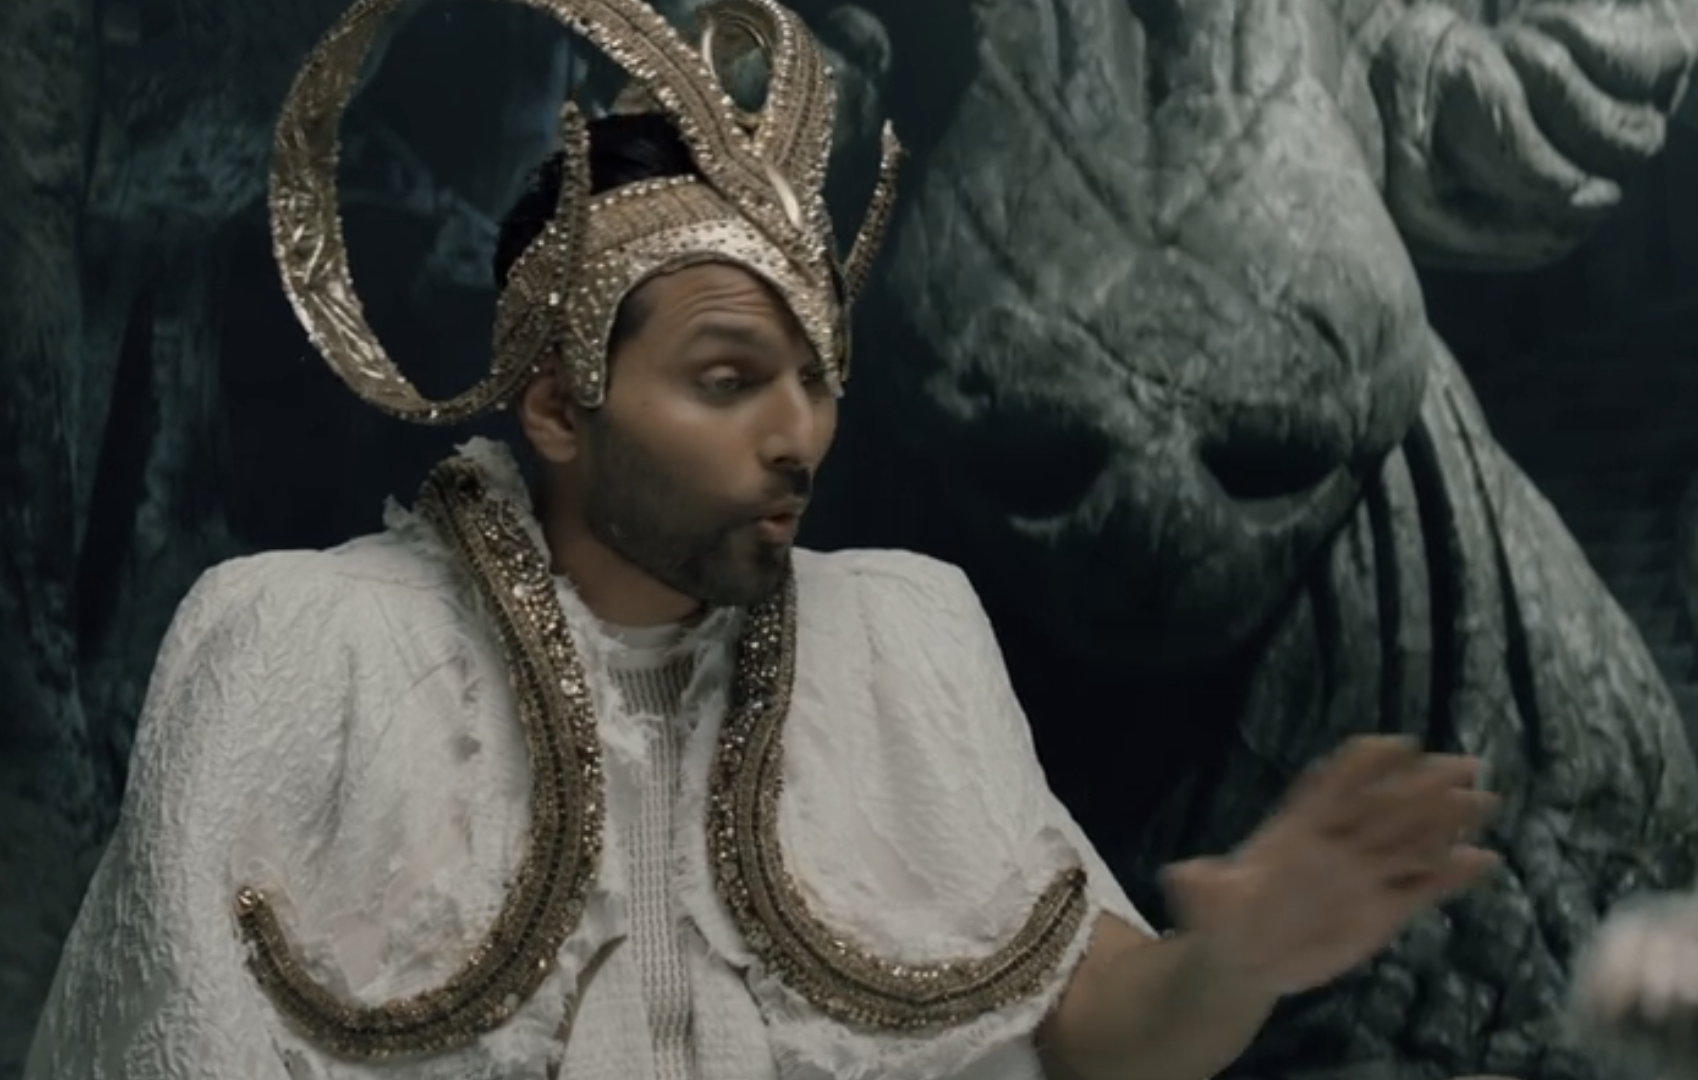 Jay in a detailed costume with headdress sits beside a CGI creature, expressing surprise or conversation